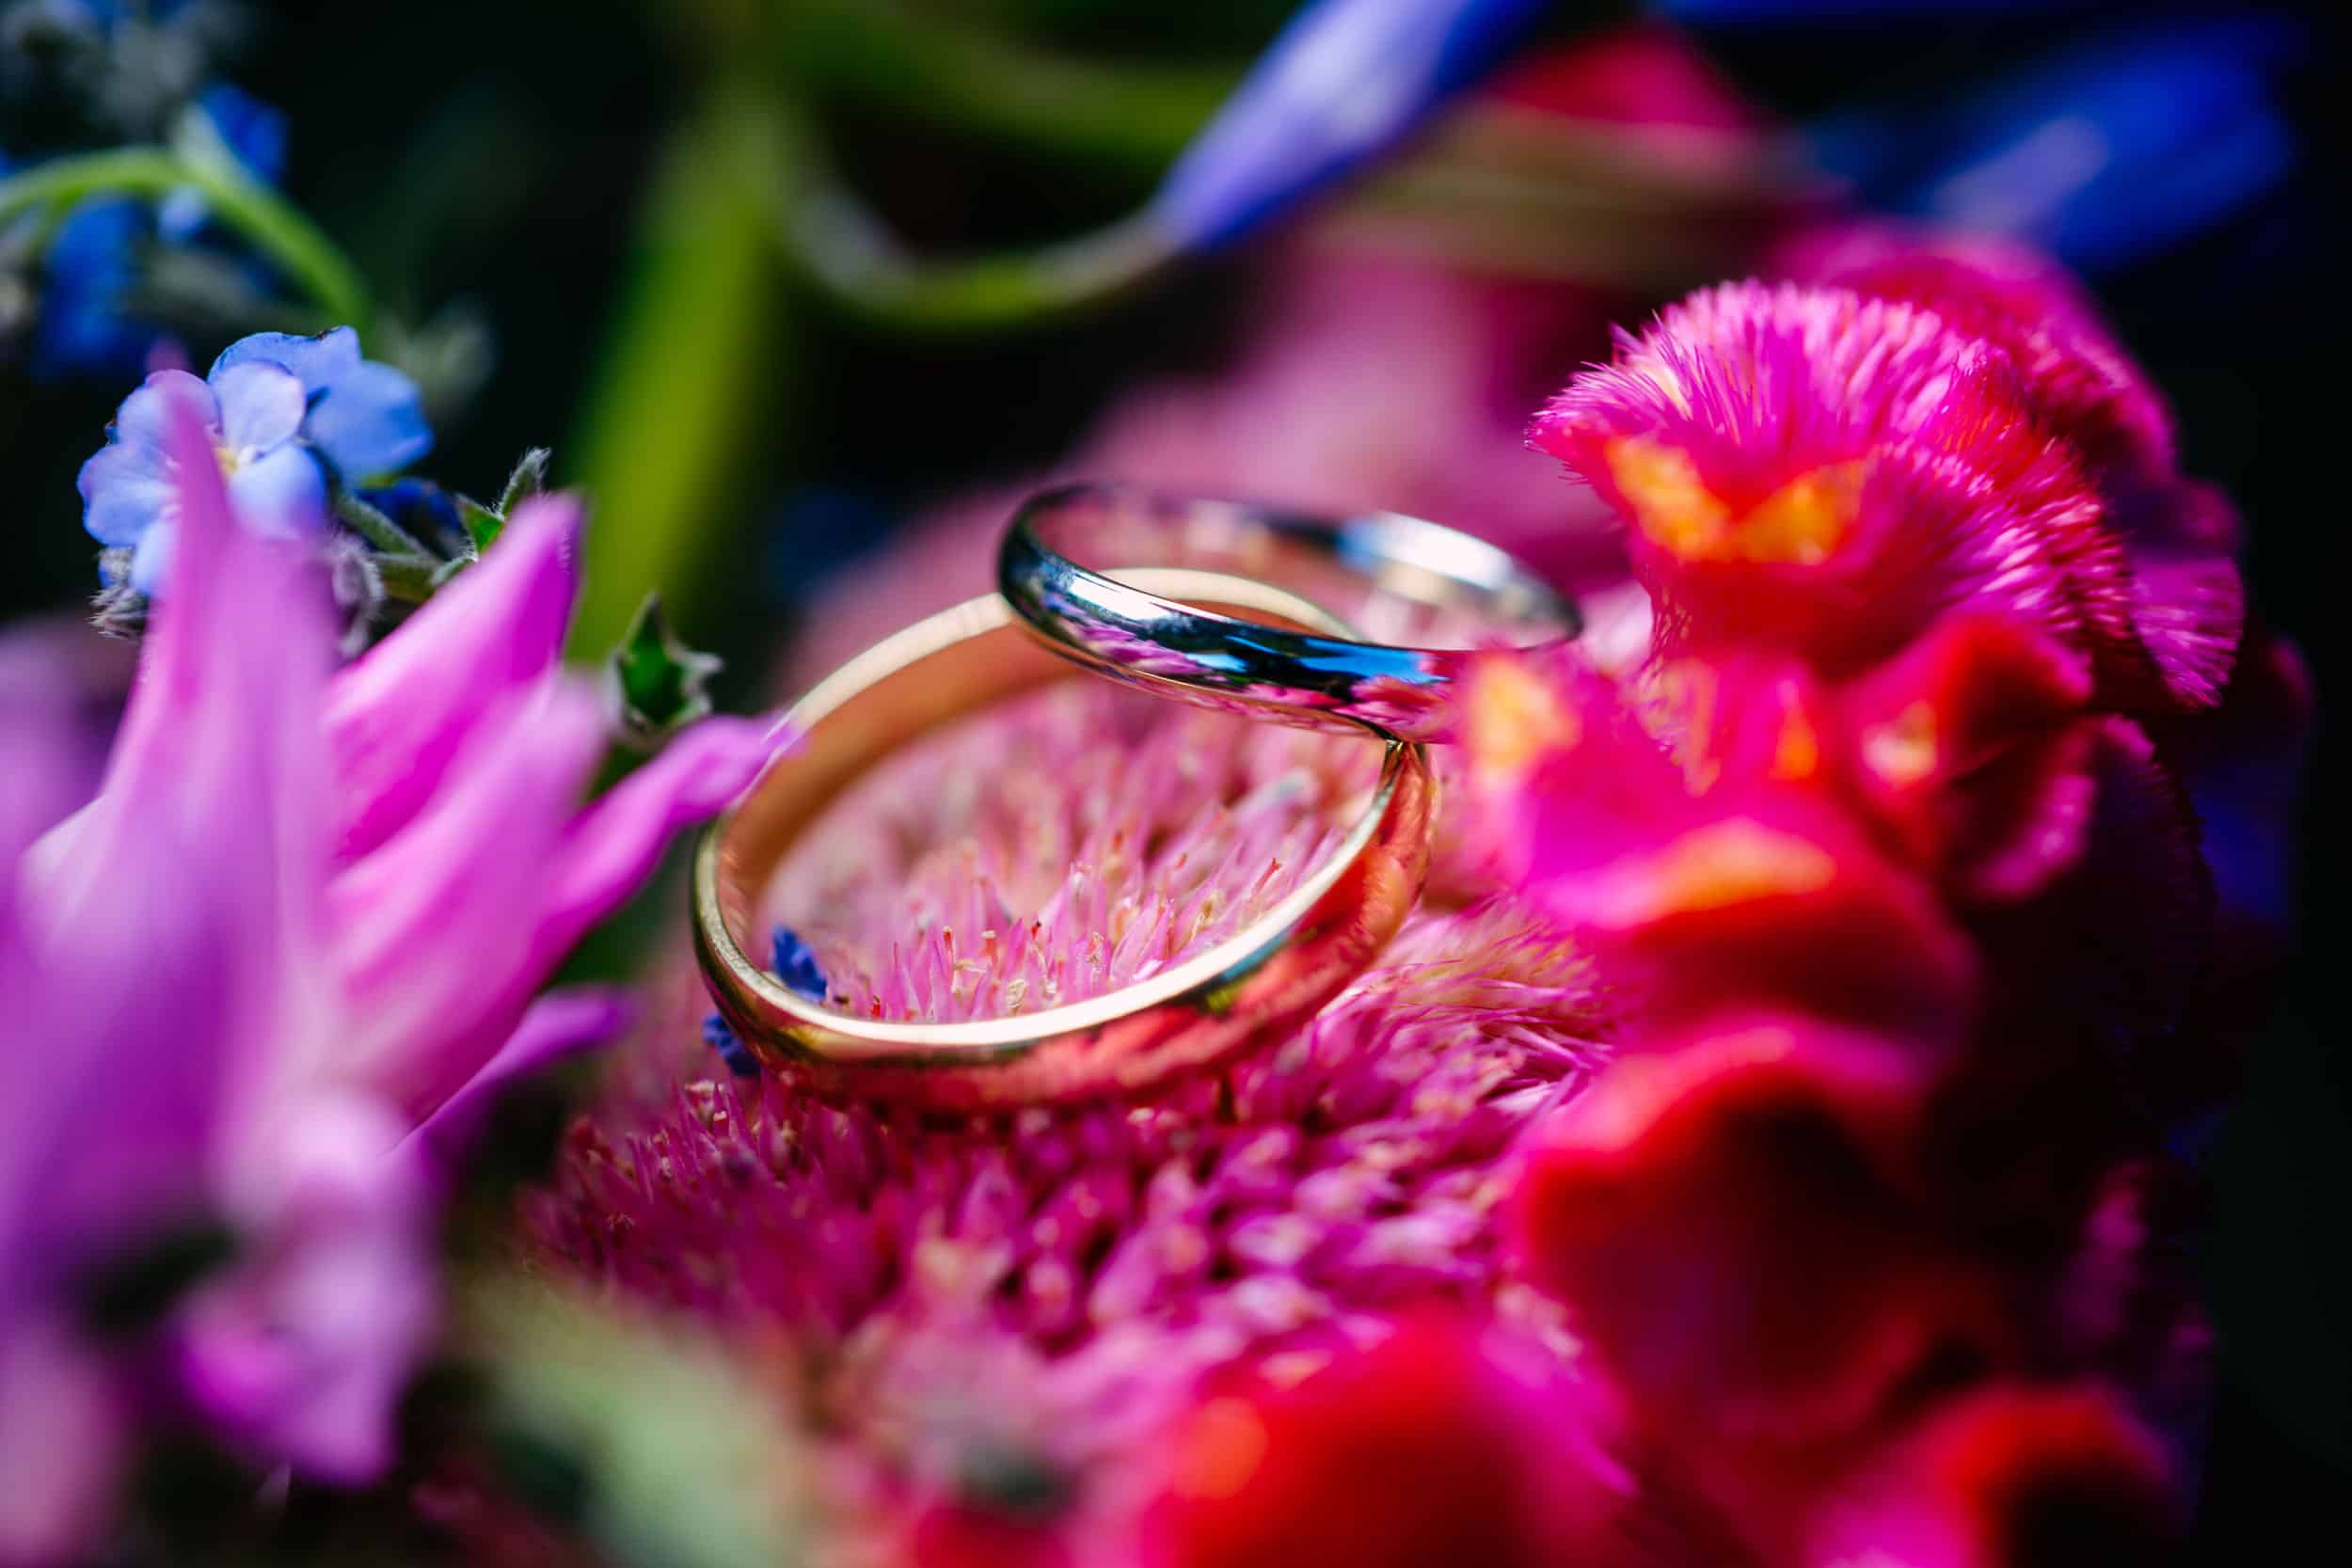 During the betrothal there are two wedding rings on flowers.